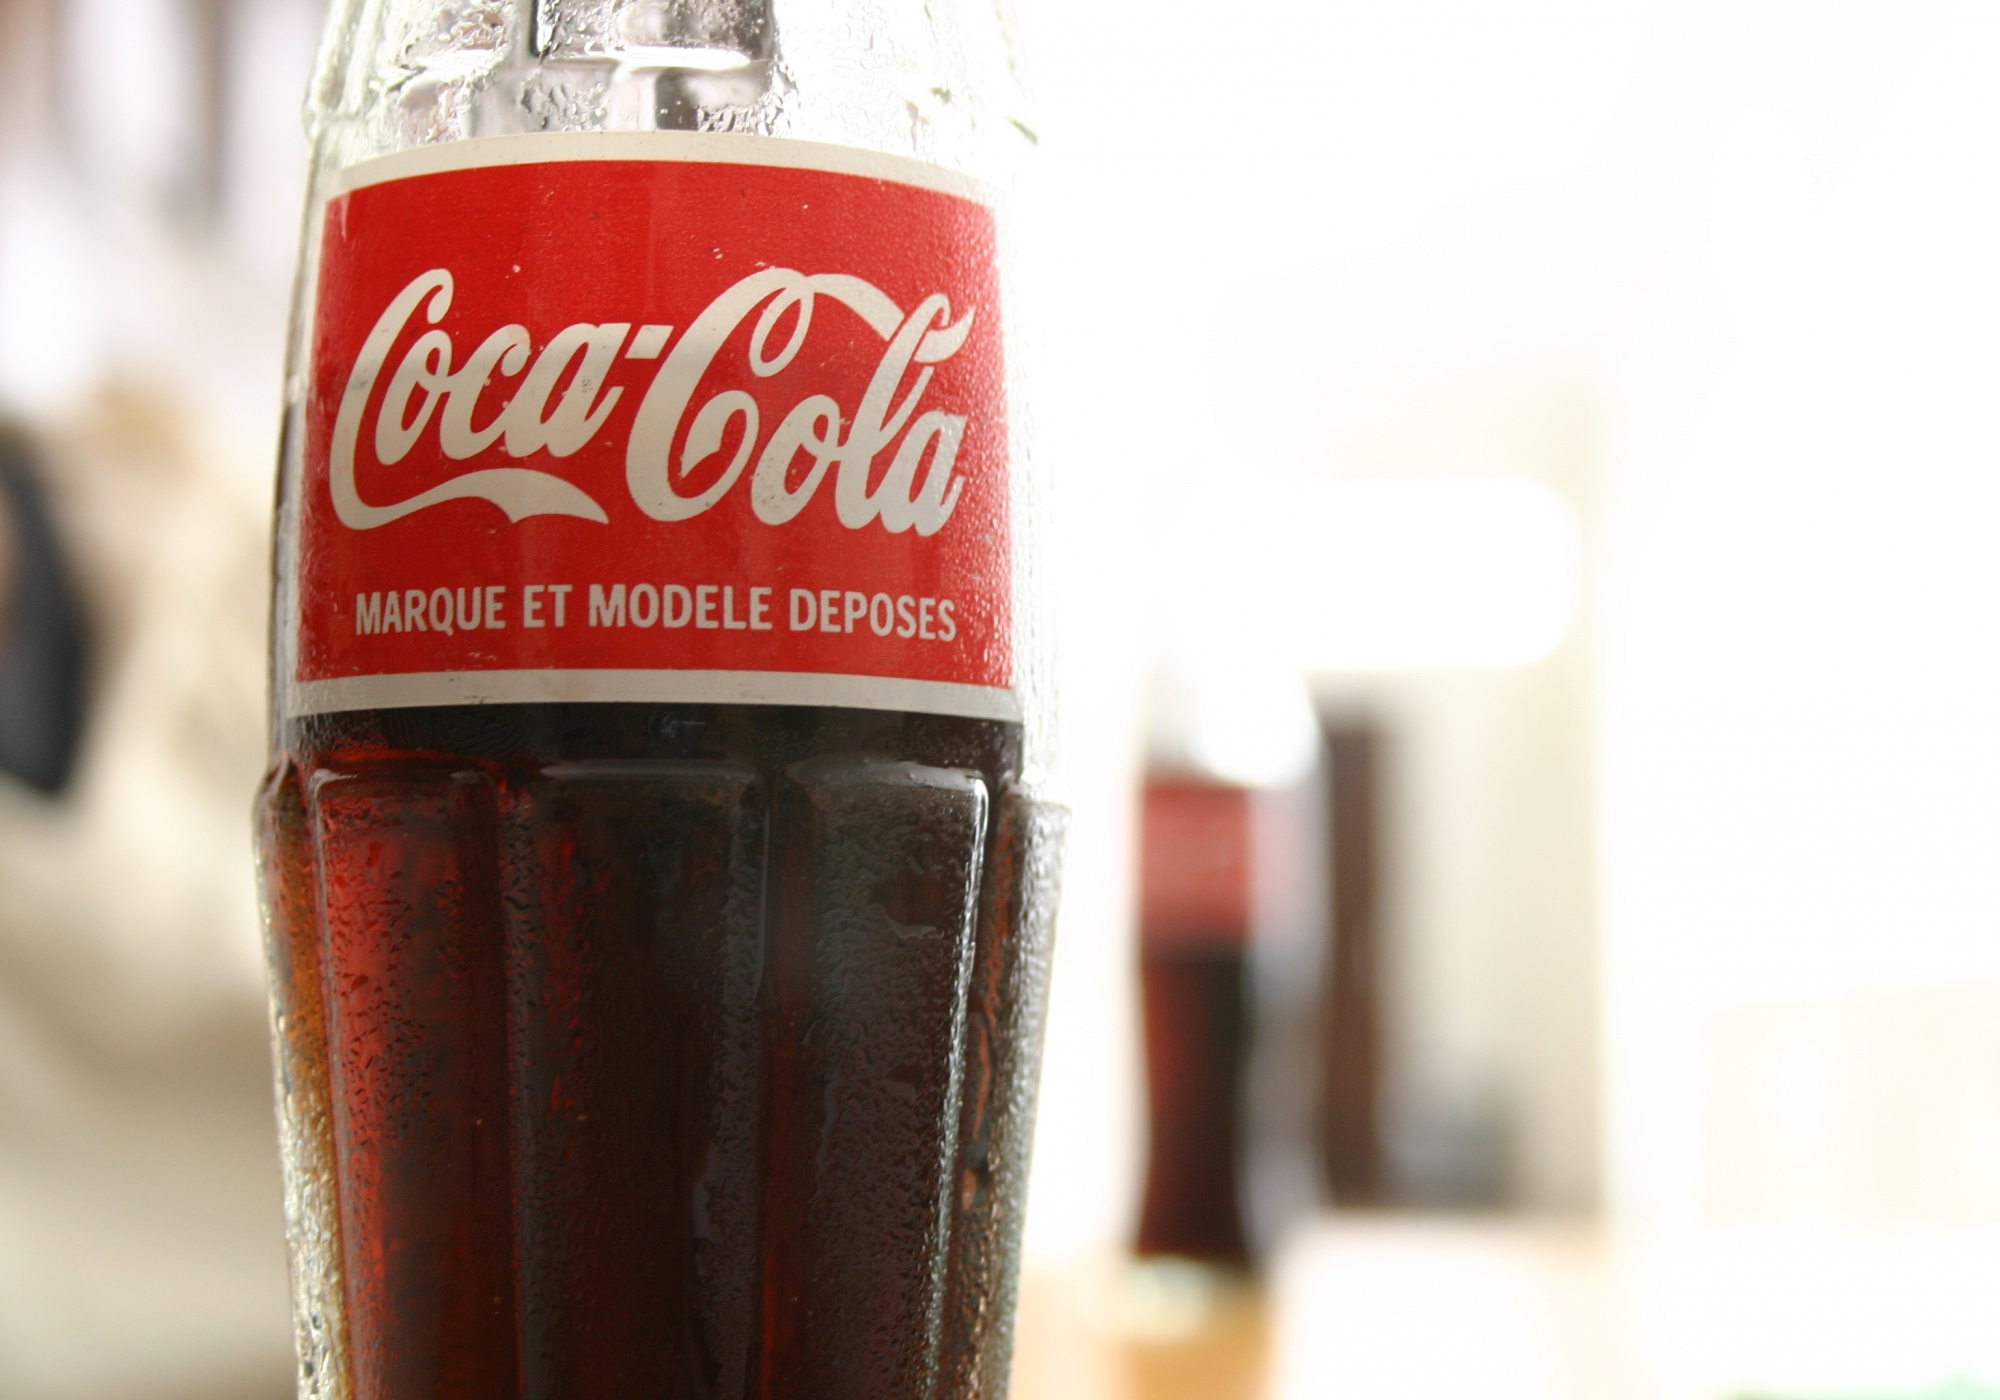 Coca-Cola - What About That Return On Equity? - The Coca-Cola Company ...